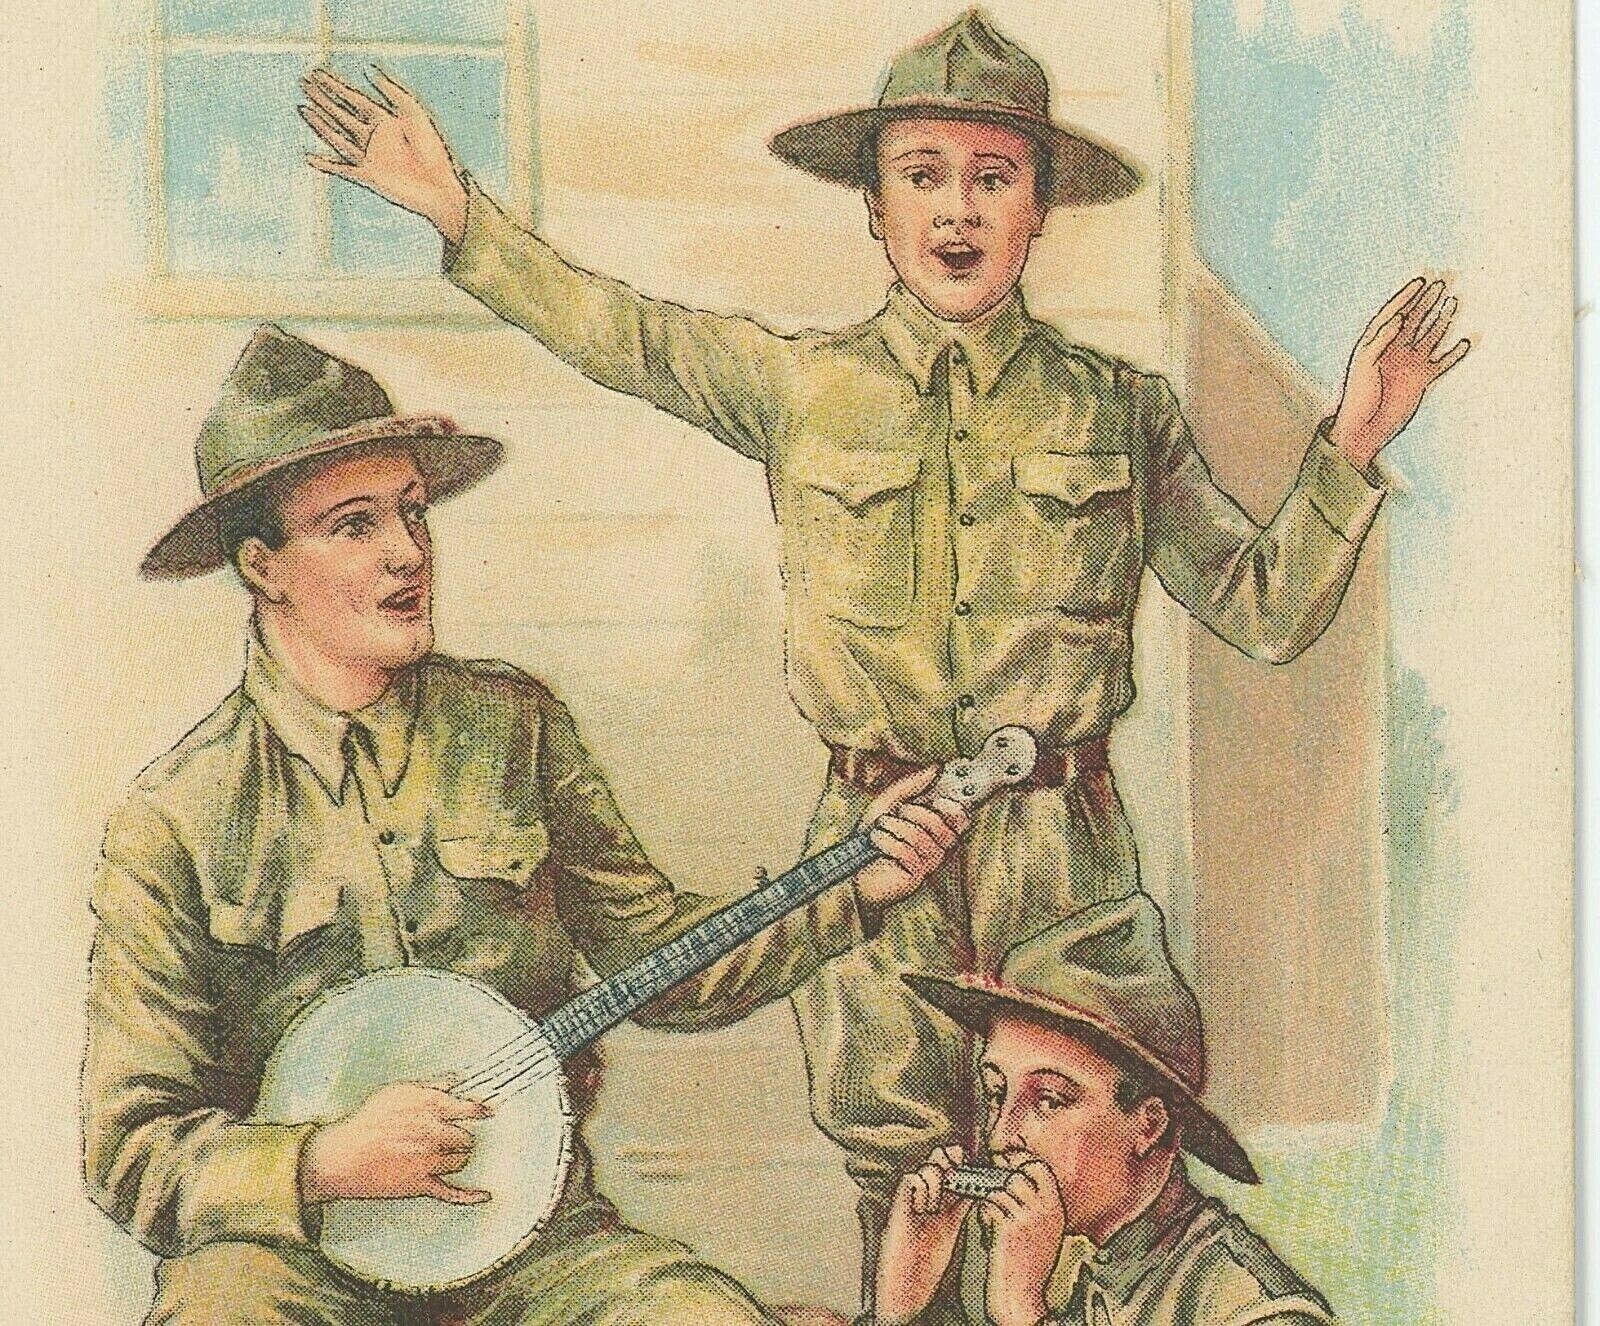  WWI, 3 US Soldiers Singing And Playing Music, Banjo, Harmonica, Army